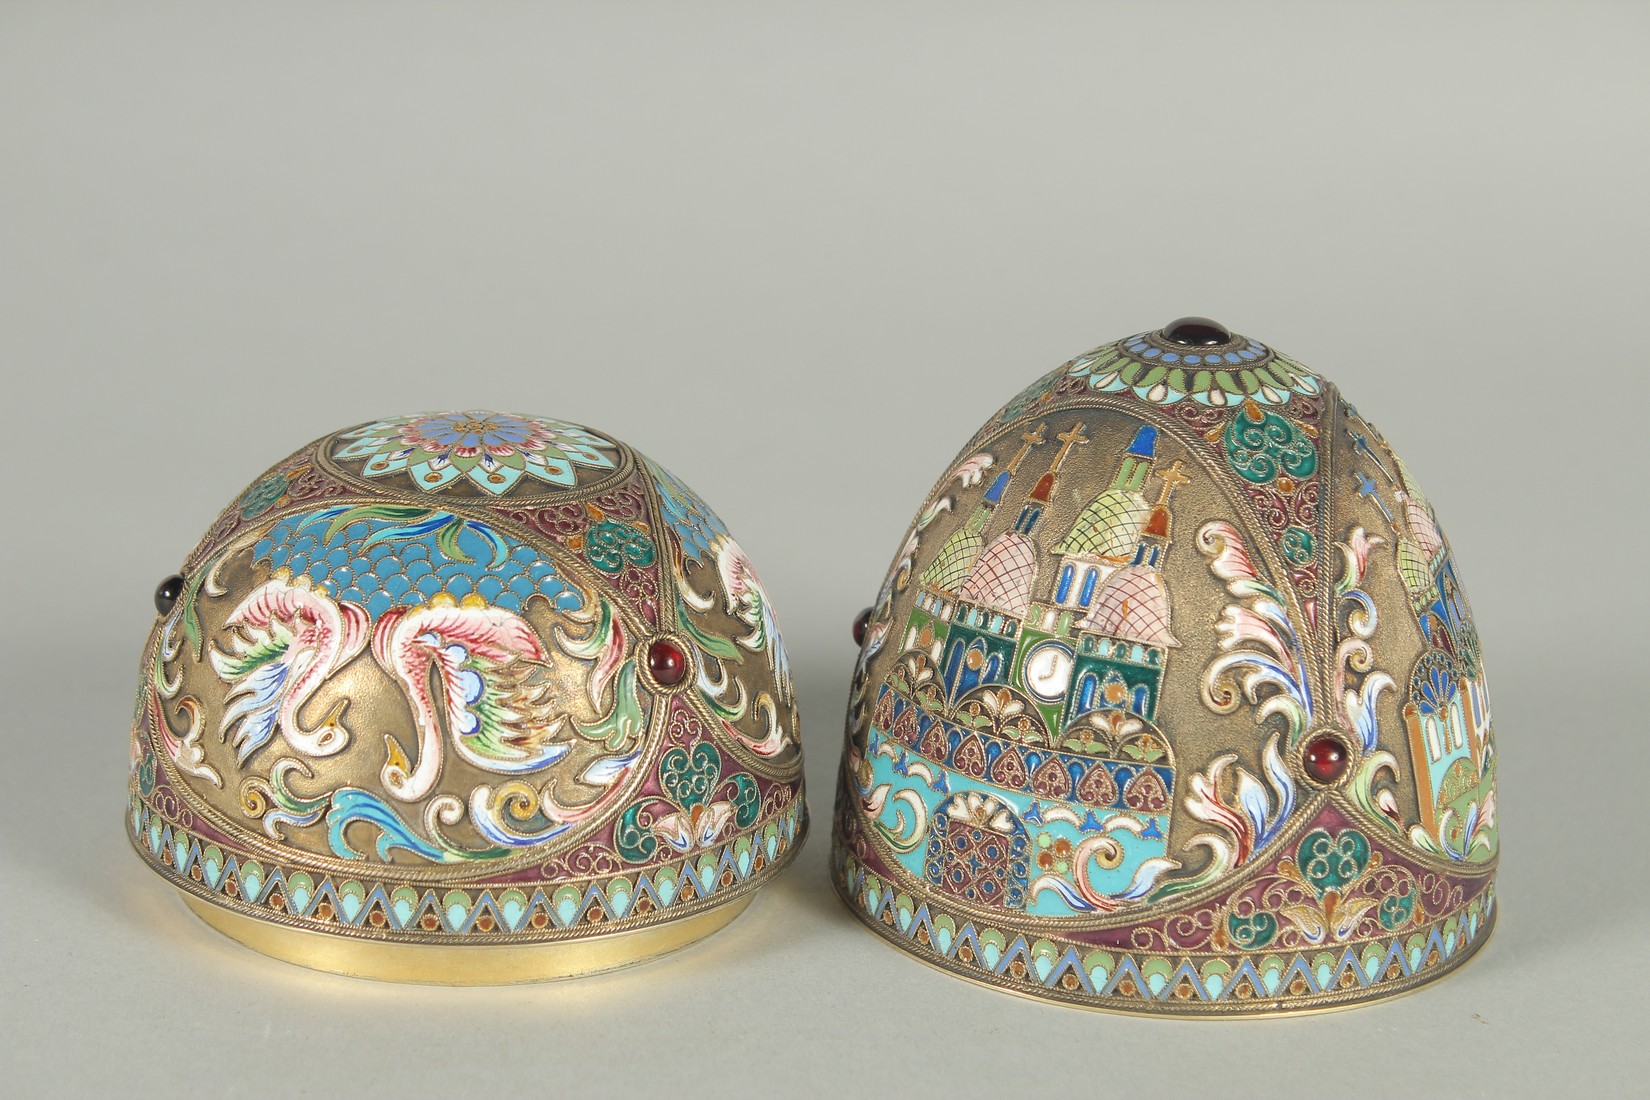 A LARGE RUSSIAN SILVER AND ENAMEL EGG, decorated with panels of white swans and Russian orthodox - Image 4 of 10